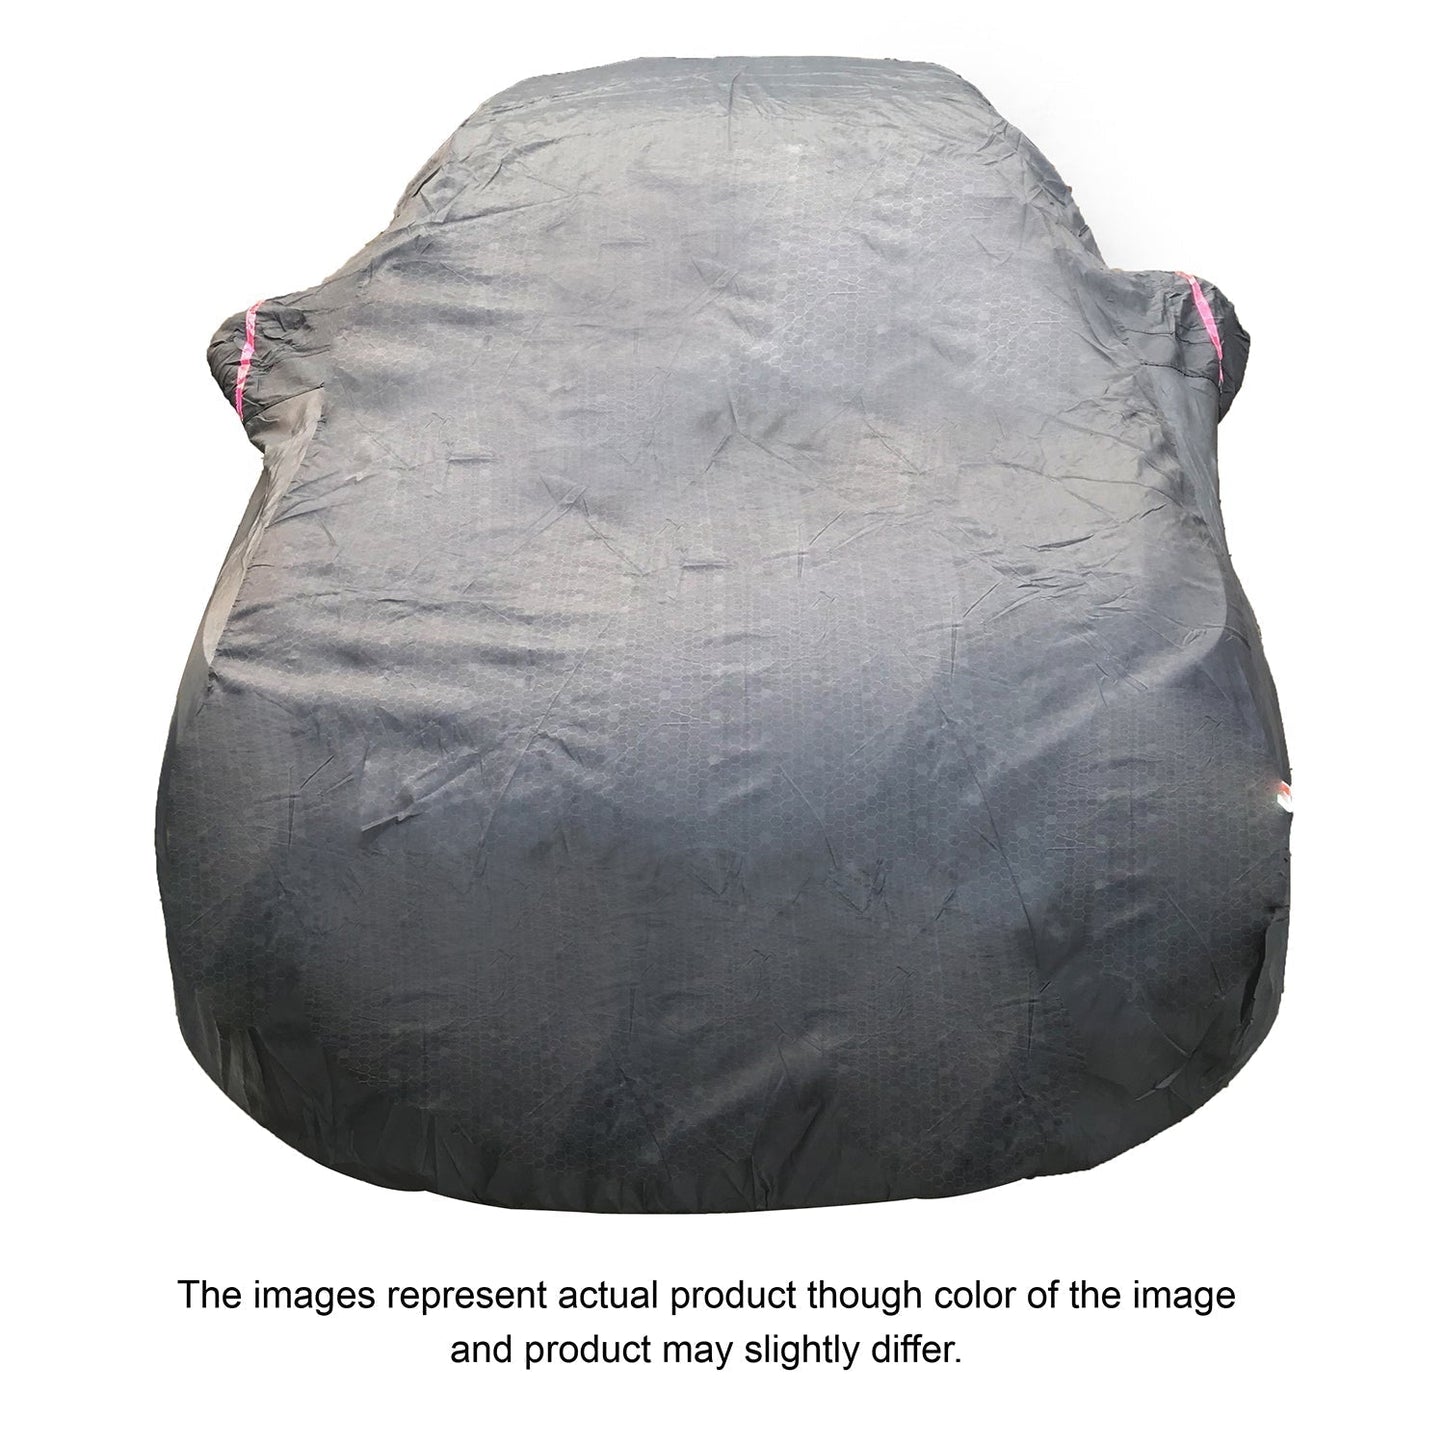 Oshotto 100% Dust Proof, Water Resistant Grey Car Body Cover with Mirror Pocket For Volkswagen Tiguan